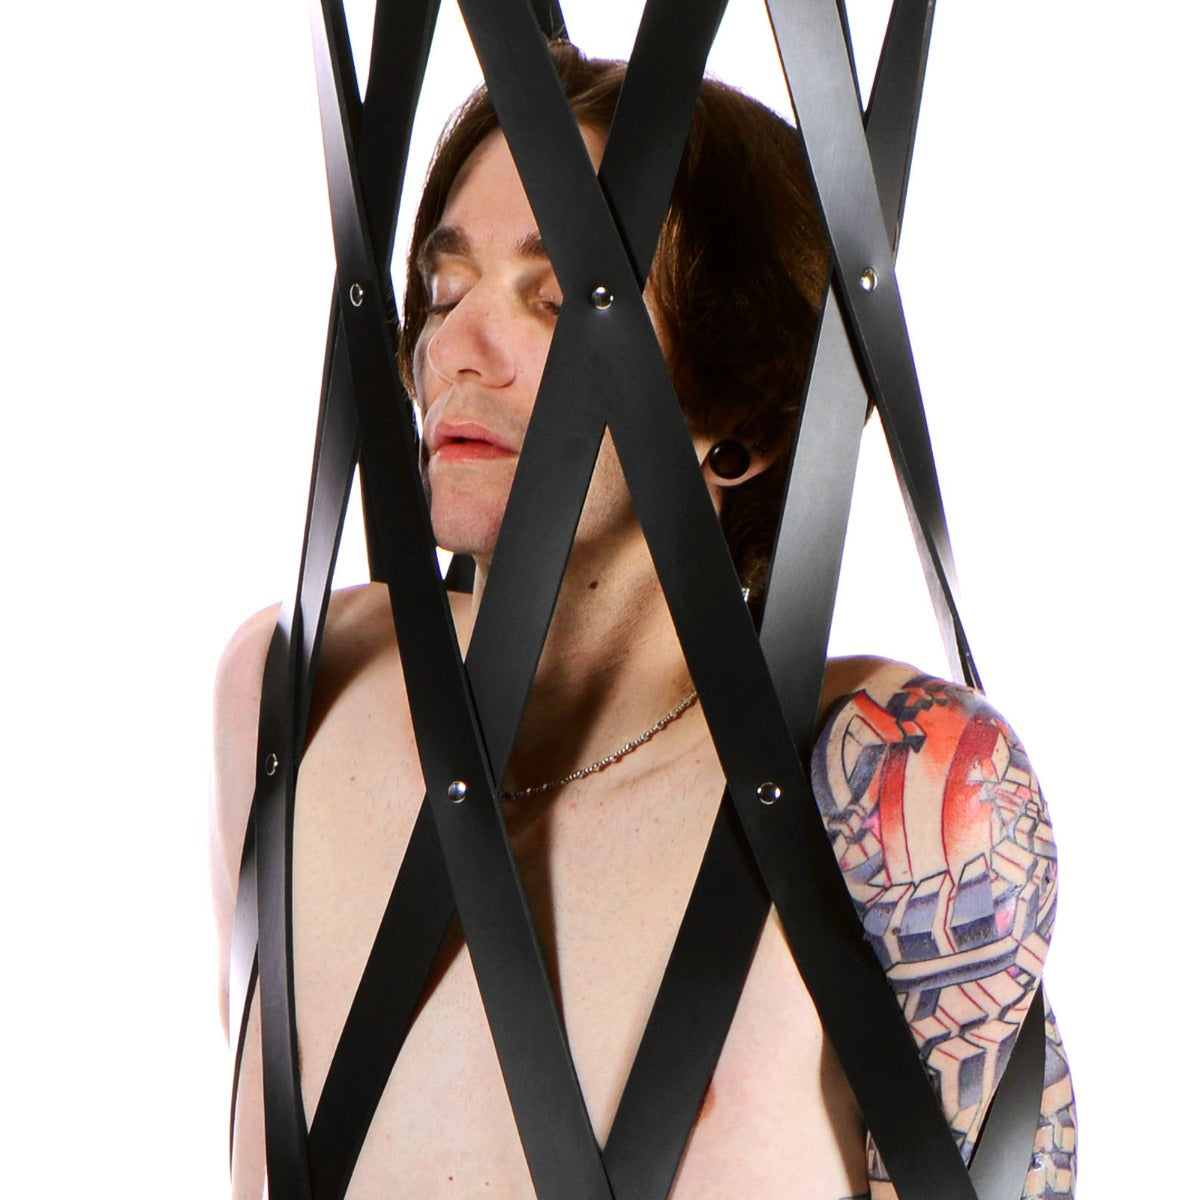 Hanging Rubber Strap Cage (8086421111023)